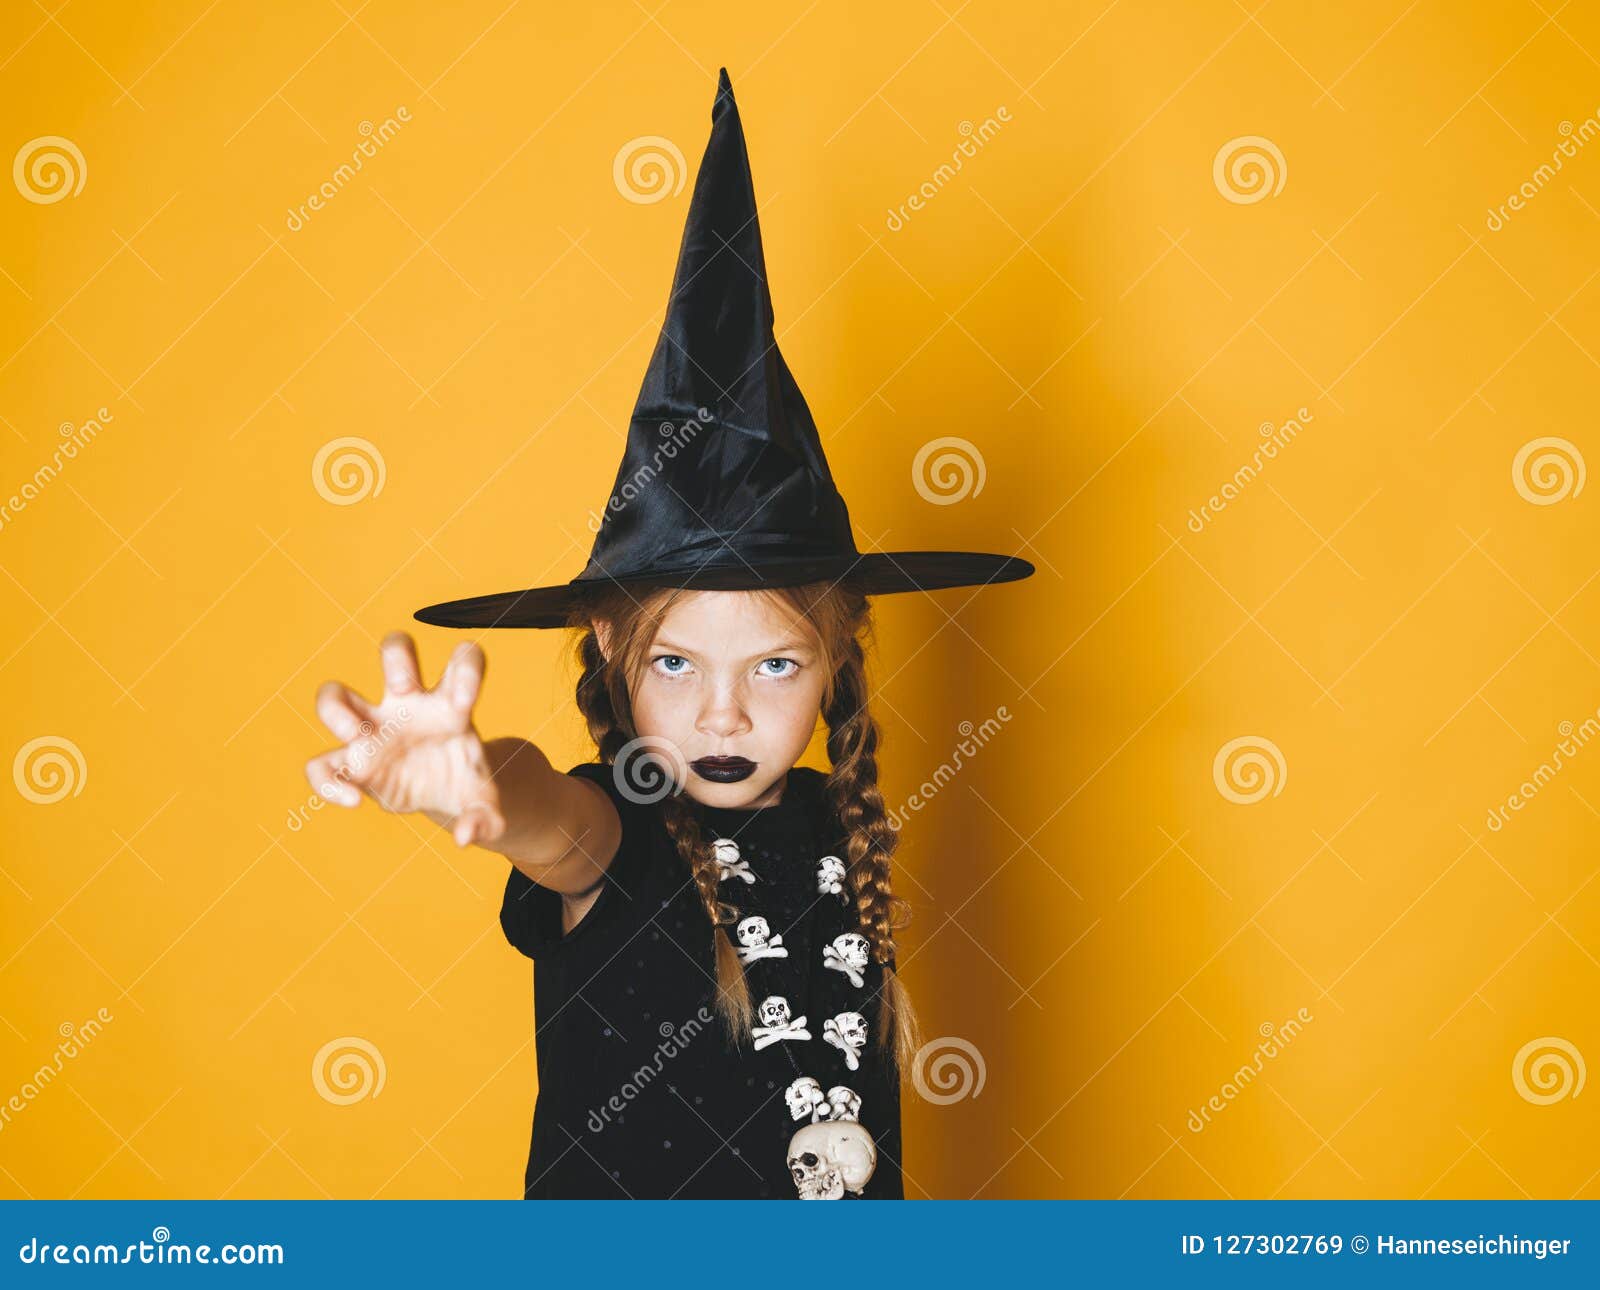 Beautiful Young Halloween Witch on Orange Background with Black Hat ...